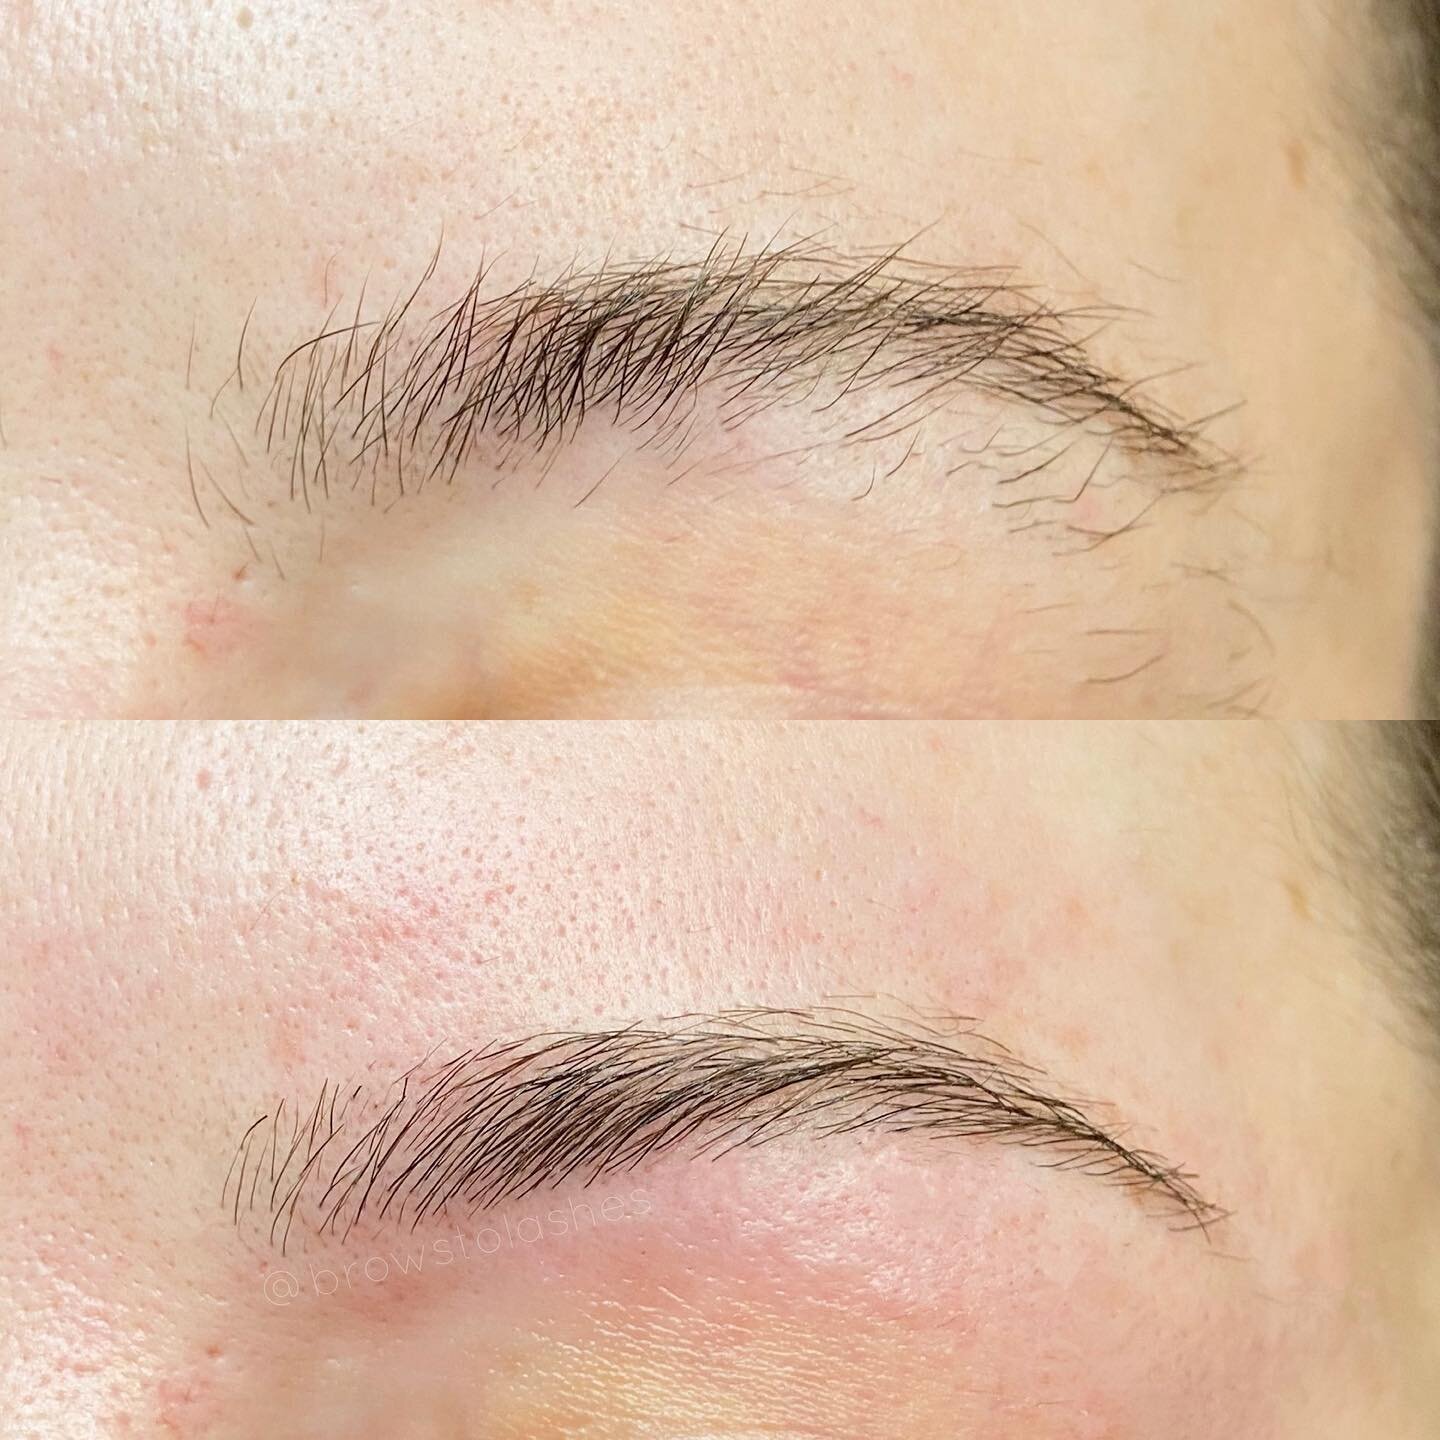 We love a good brow clean up! Our client grew her brows out for a couple of months to let some areas fill in a bit and the results are amazing! (The second photo was taken immediately after service. The redness does subside within the first few hours